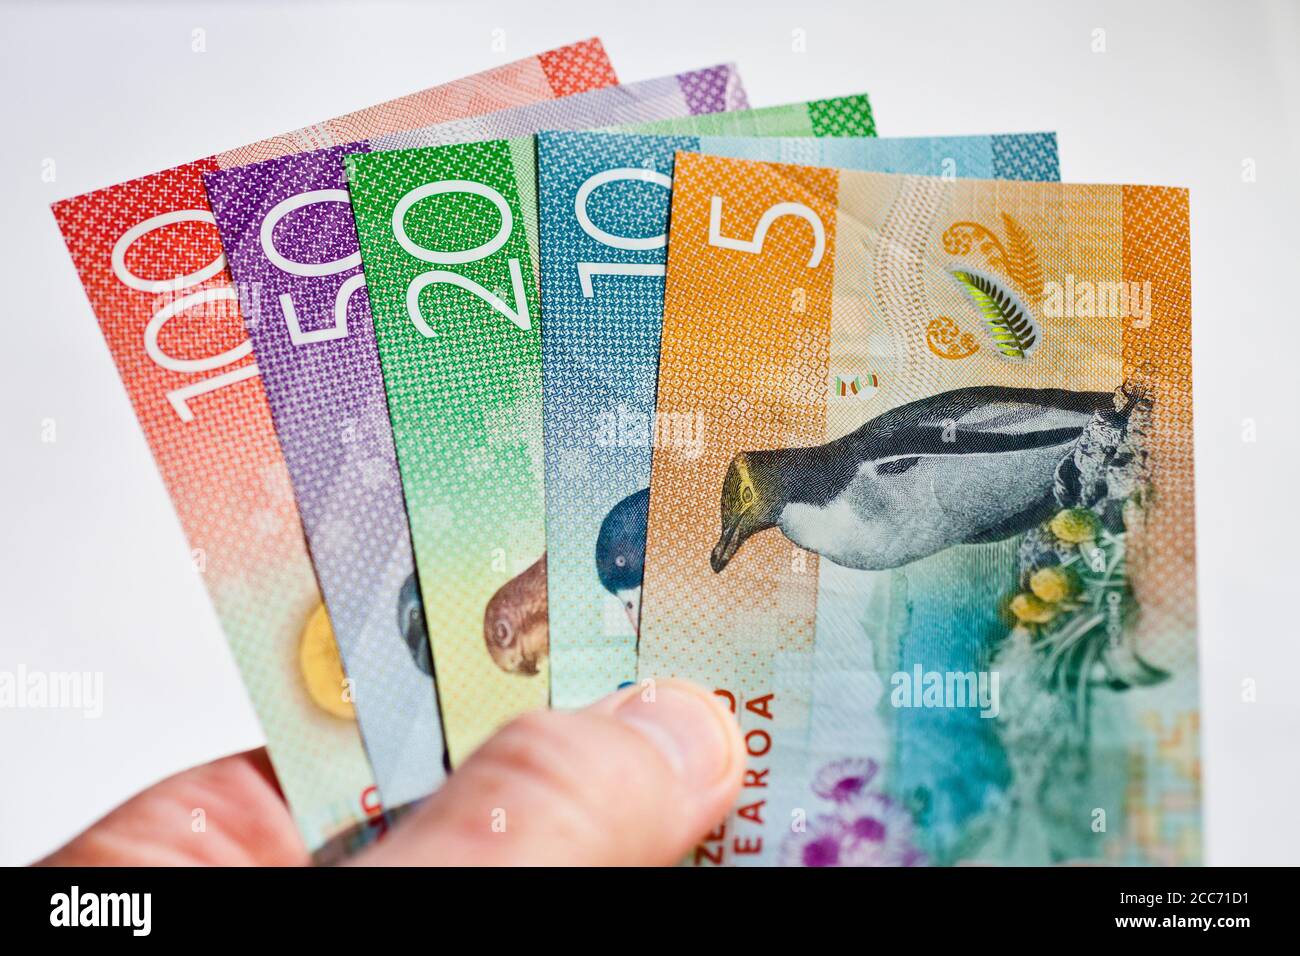 New Zealand currency held fanned out in someones hand Stock Photo